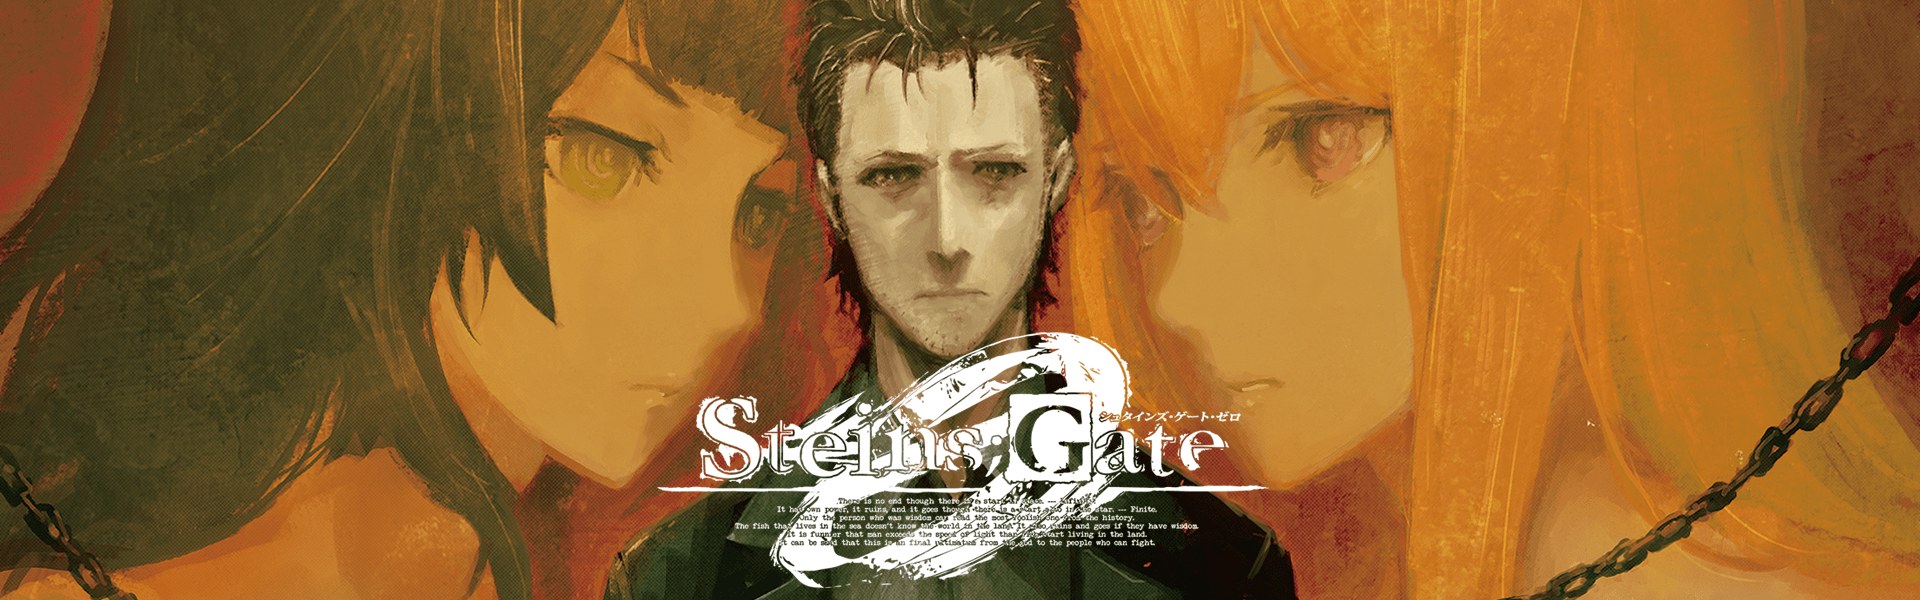 Cover image of Steins;Gate 0: Valentine's of Crystal Polymorphism - Bittersweet Intermedio